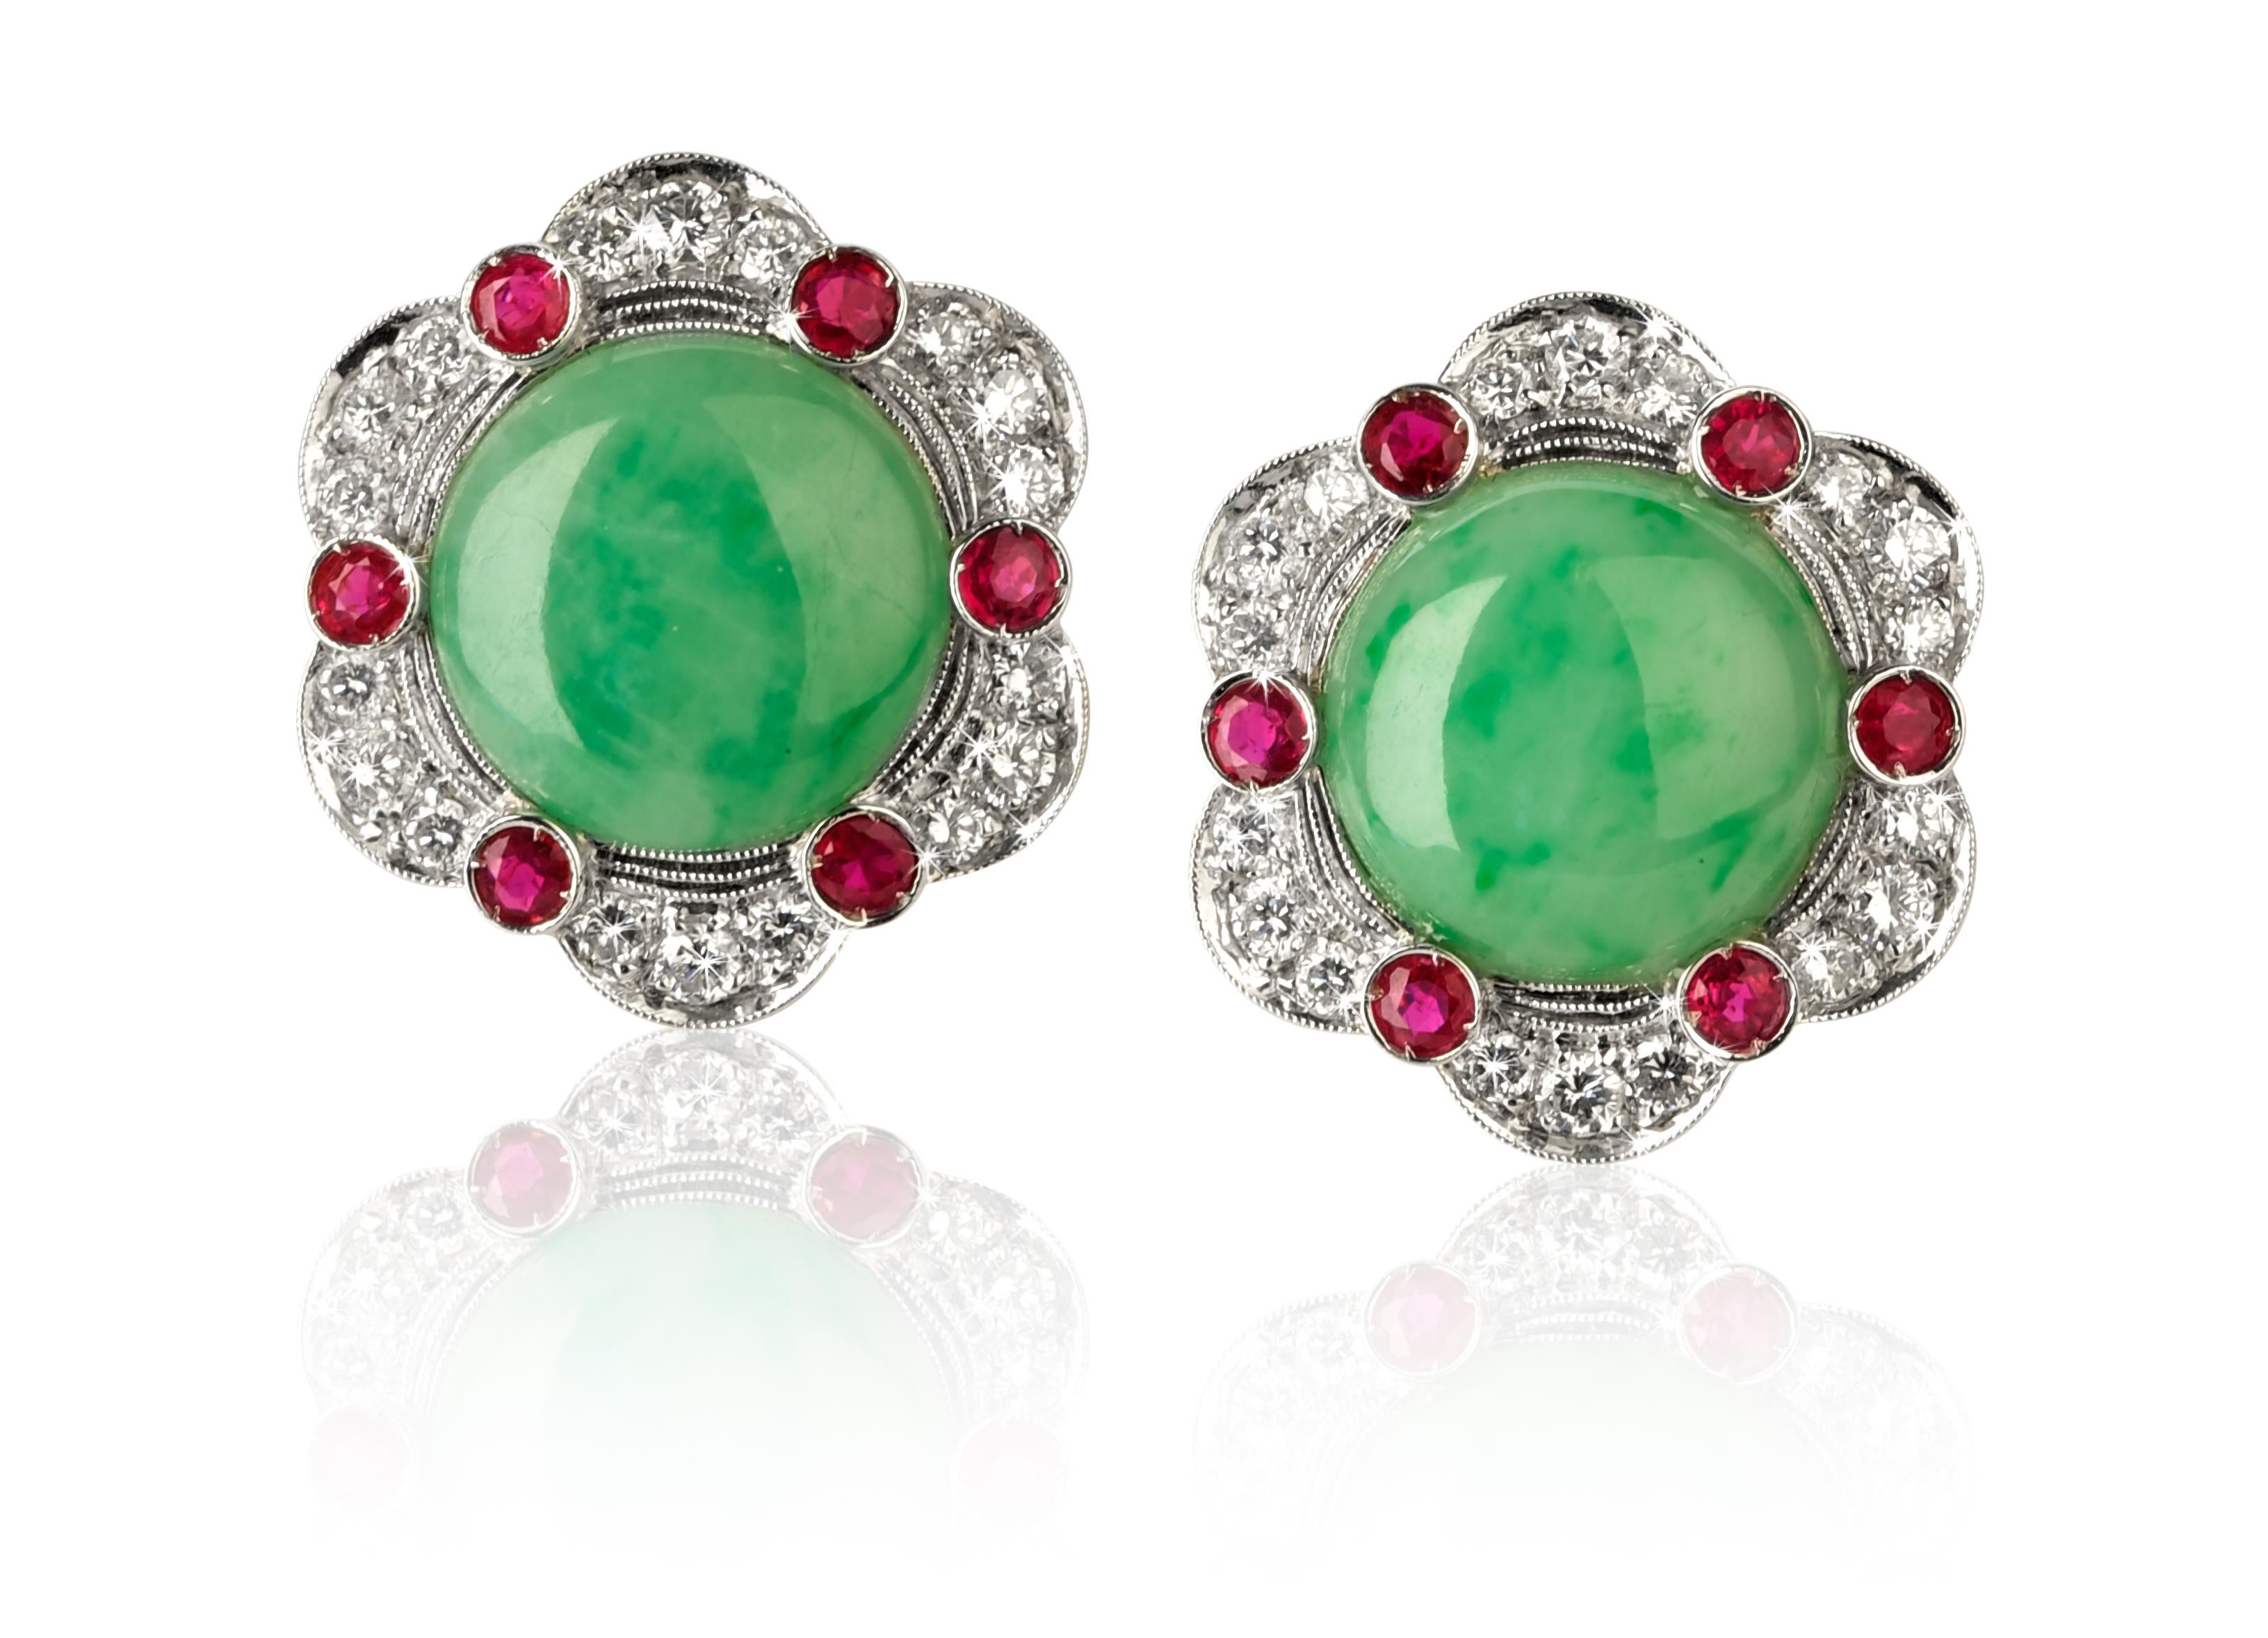 Brilliant Cut Vintage Jade Earrings From ANGELETTI PRIVATE COLLECTION Gold Diamonds Rubies For Sale